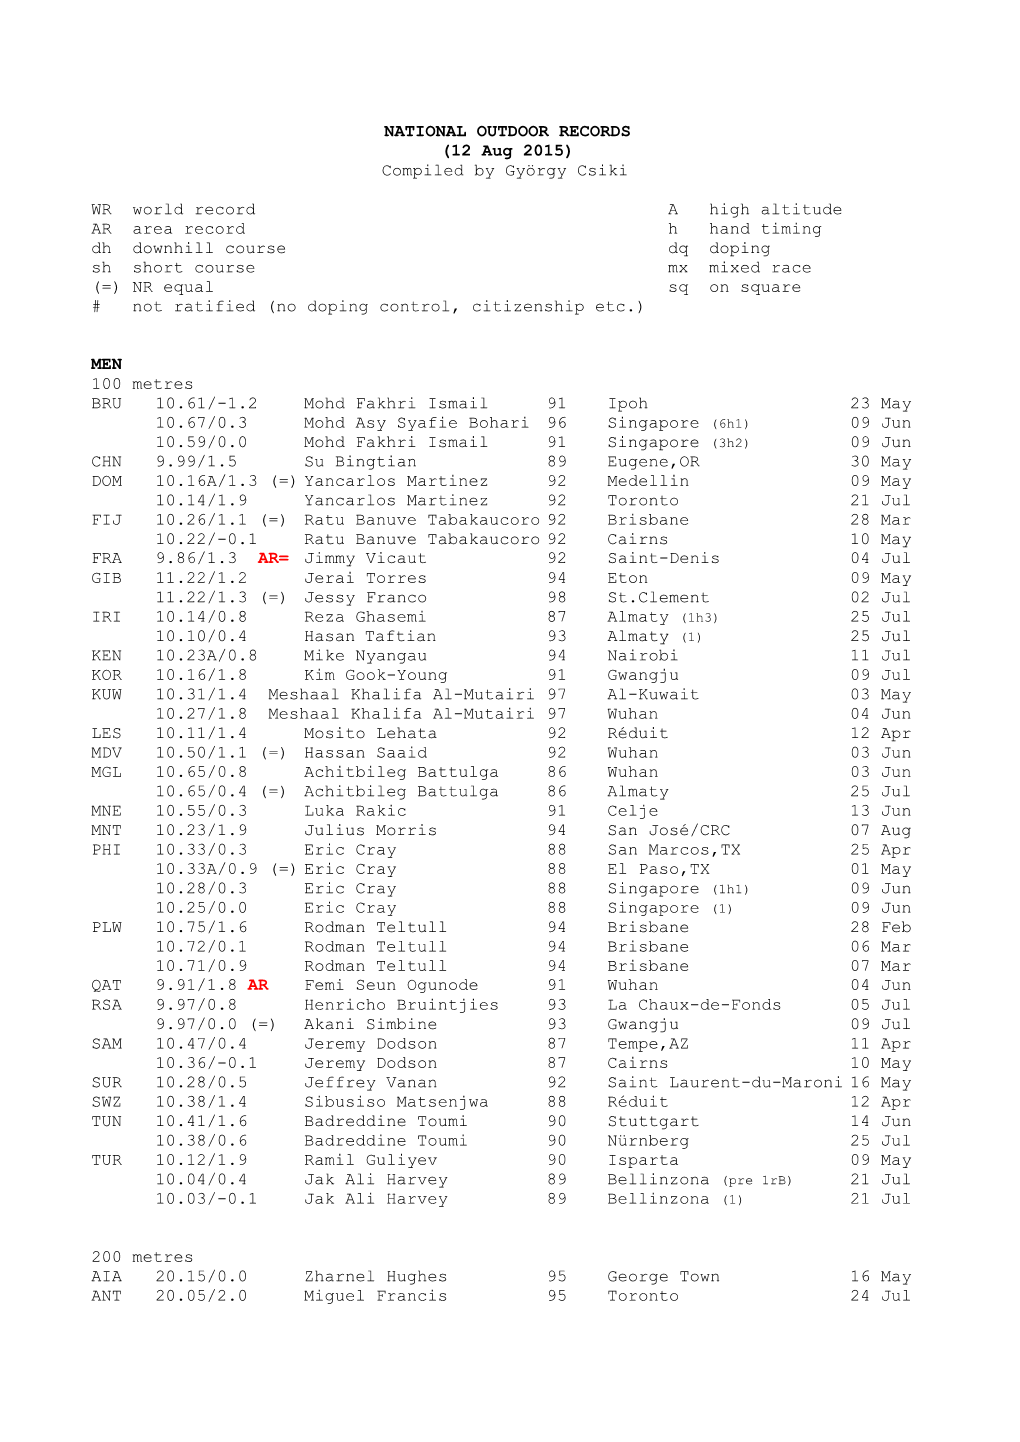 NATIONAL OUTDOOR RECORDS (12 Aug 2015) Compiled by György Csiki